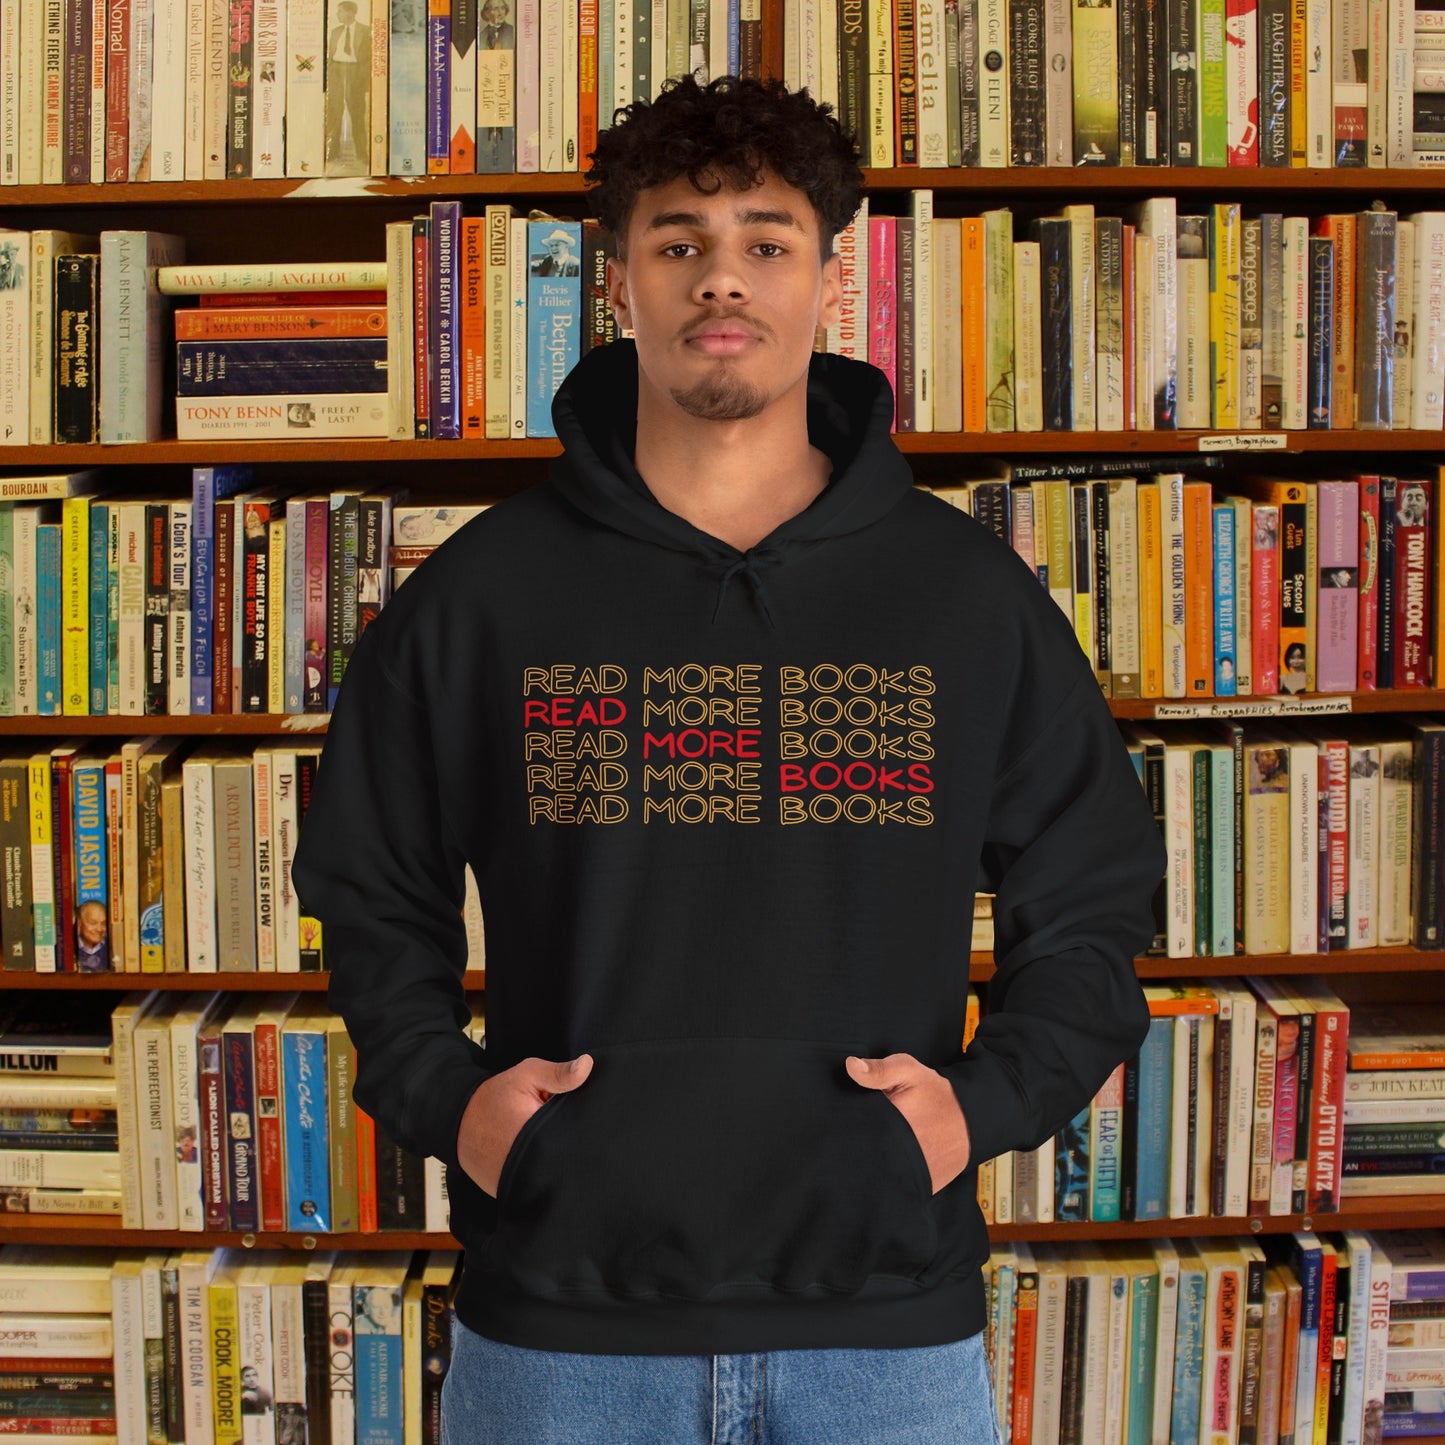 Hoodies for readers - Read More Books